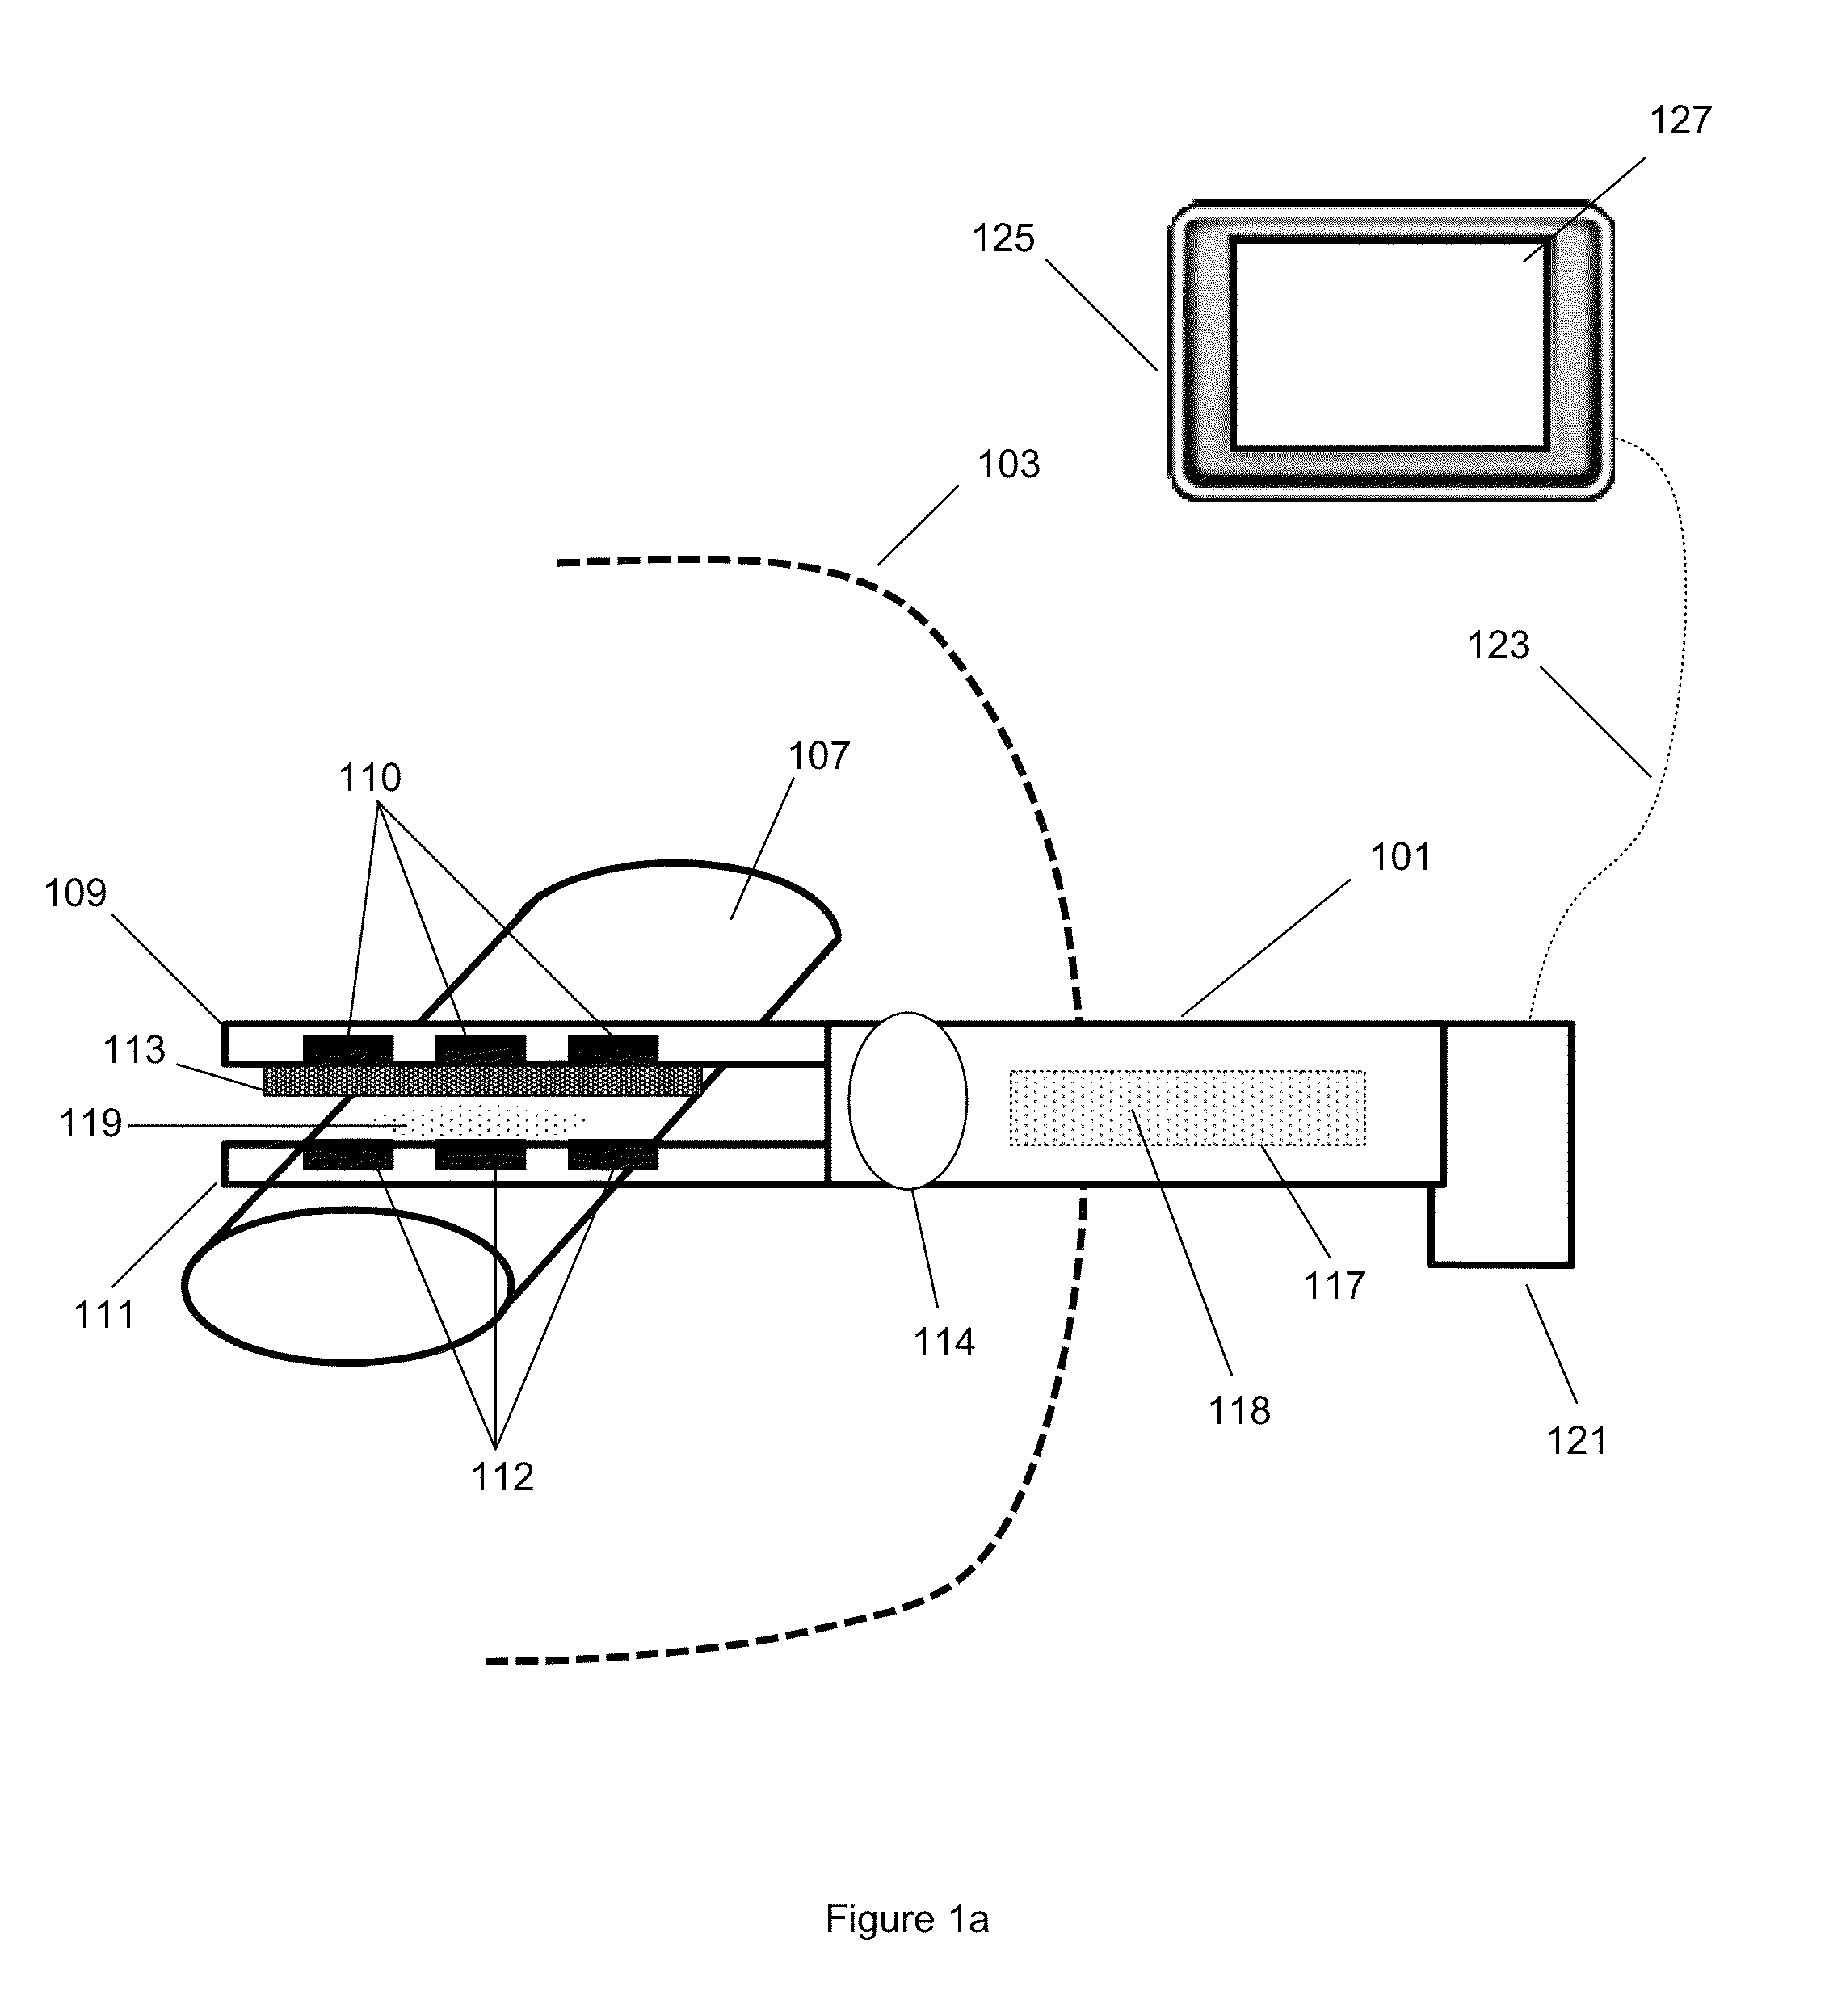 Apparatus, systems and methods for determining tissue oxygenation